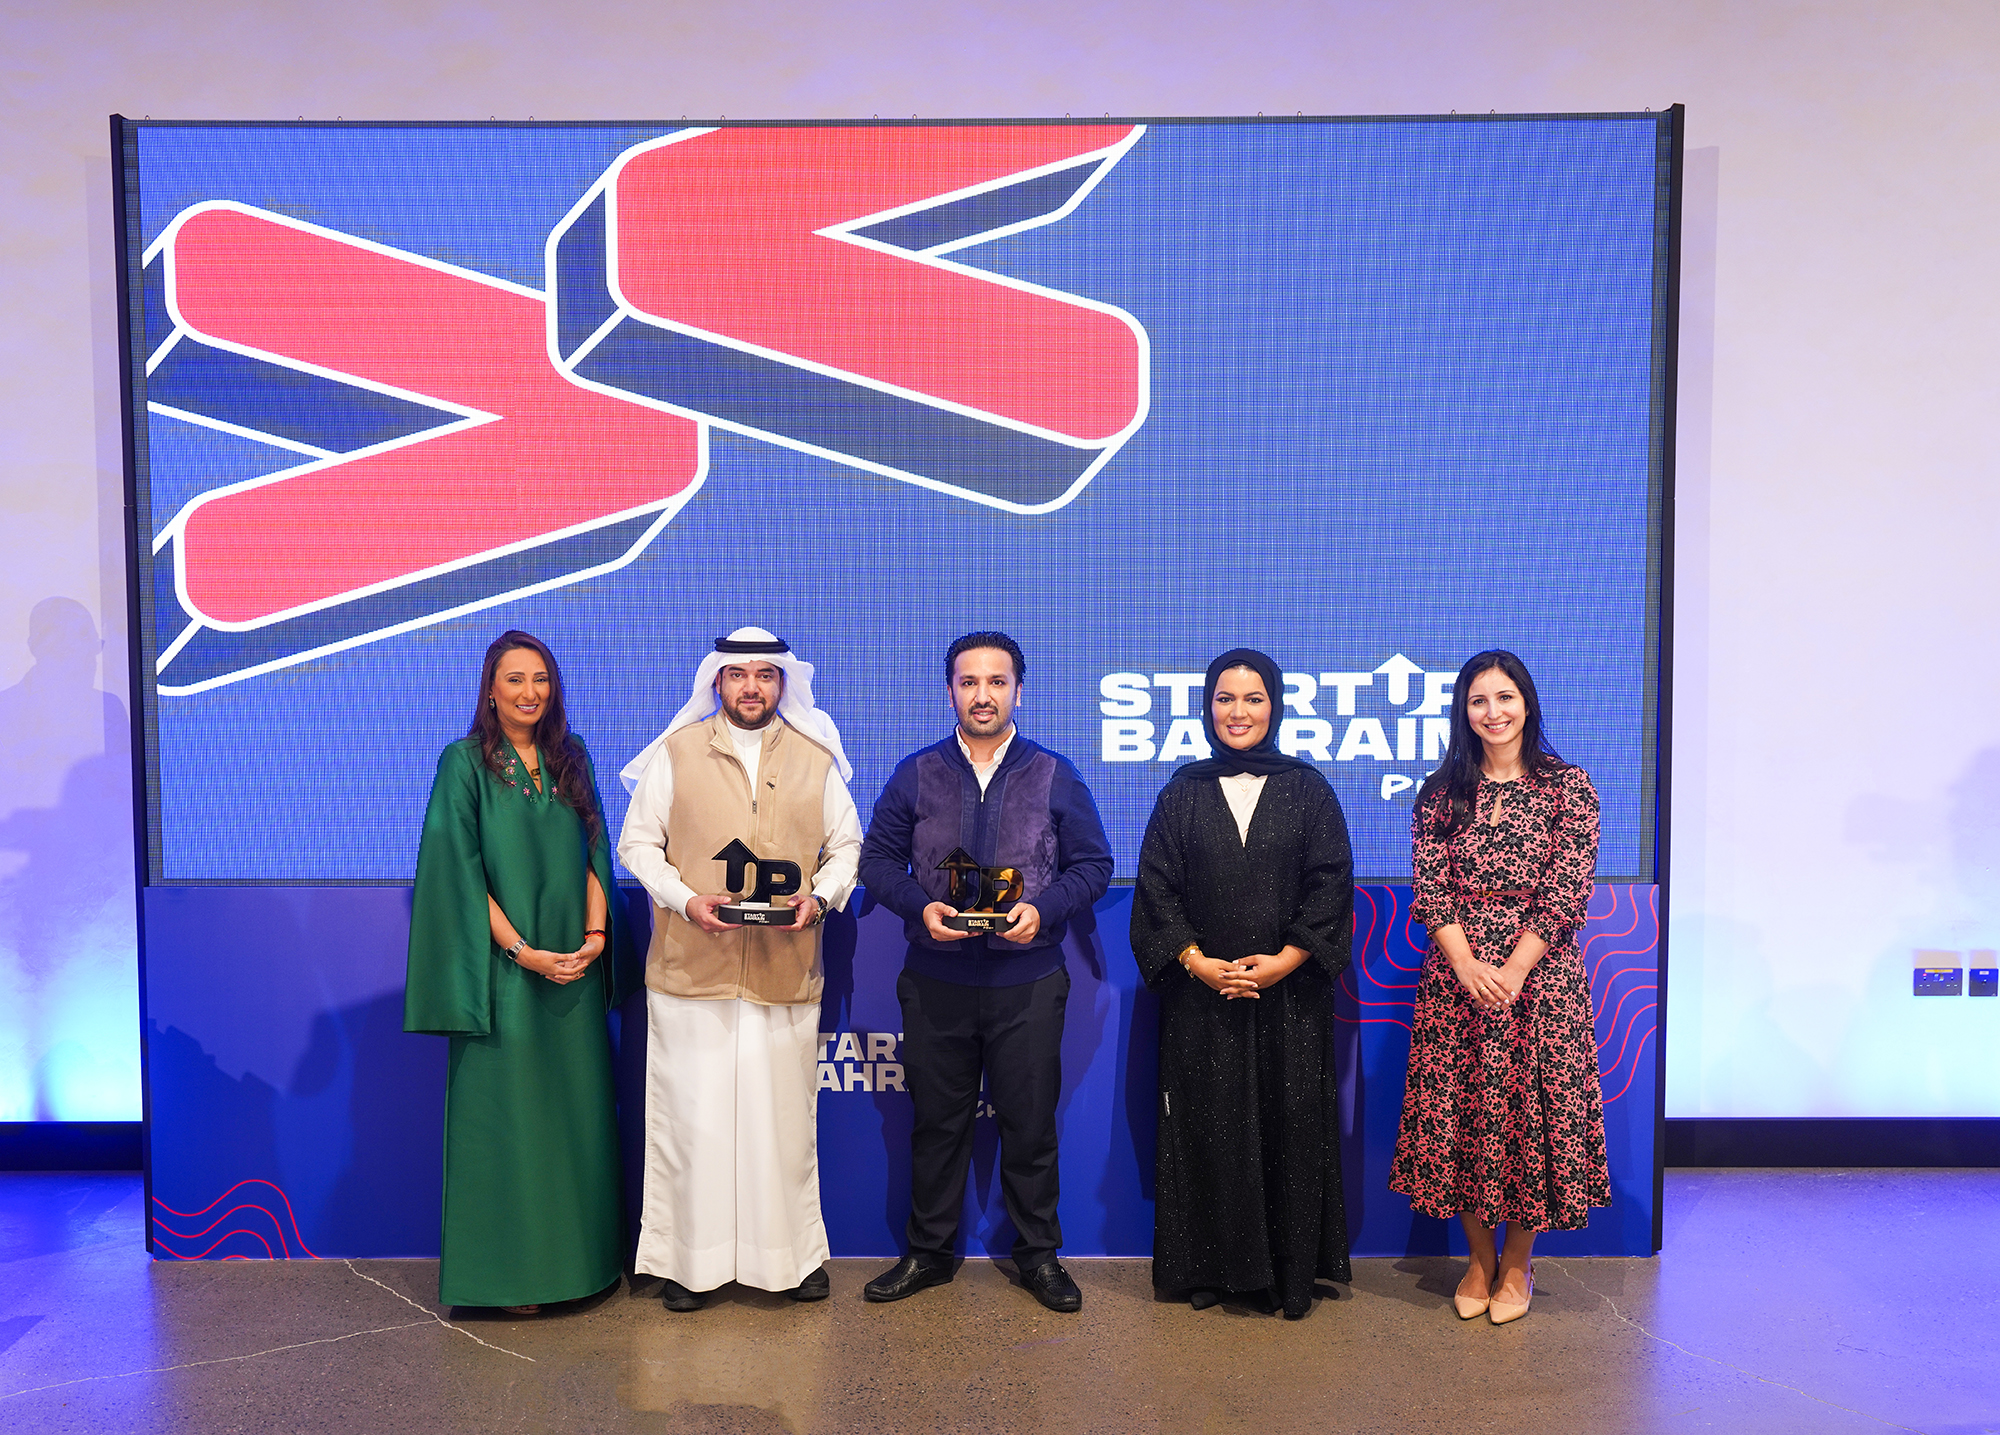 Procural Crowned First-Place Winner The StartUp Bahrain Pitch Series is back with five diverse and innovative Bahraini startups